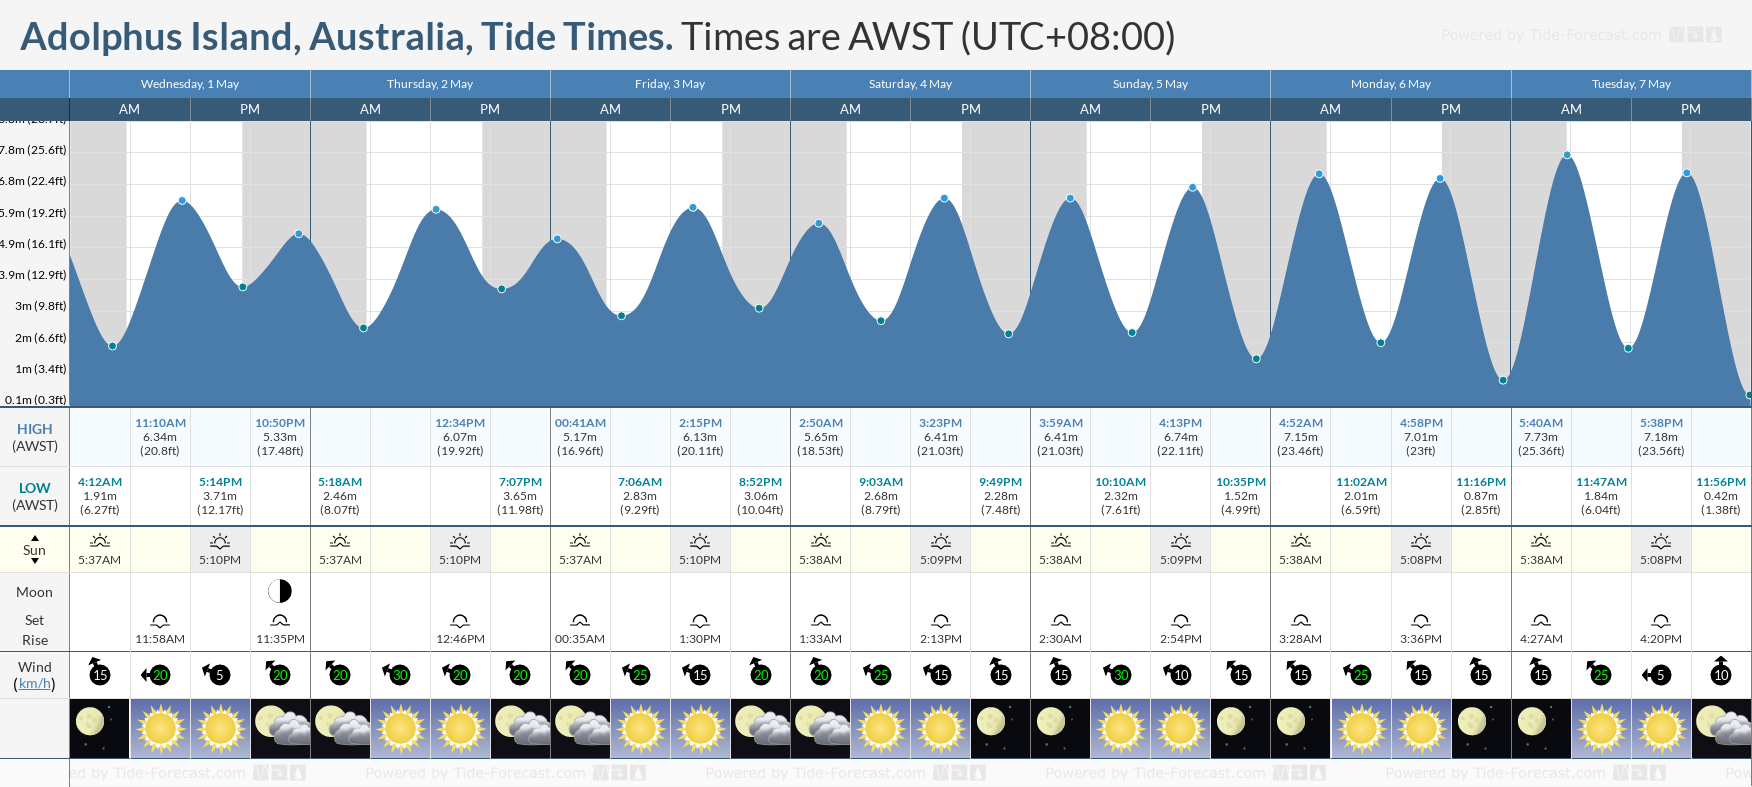 Adolphus Island, Australia Tide Chart including high and low tide tide times for the next 7 days